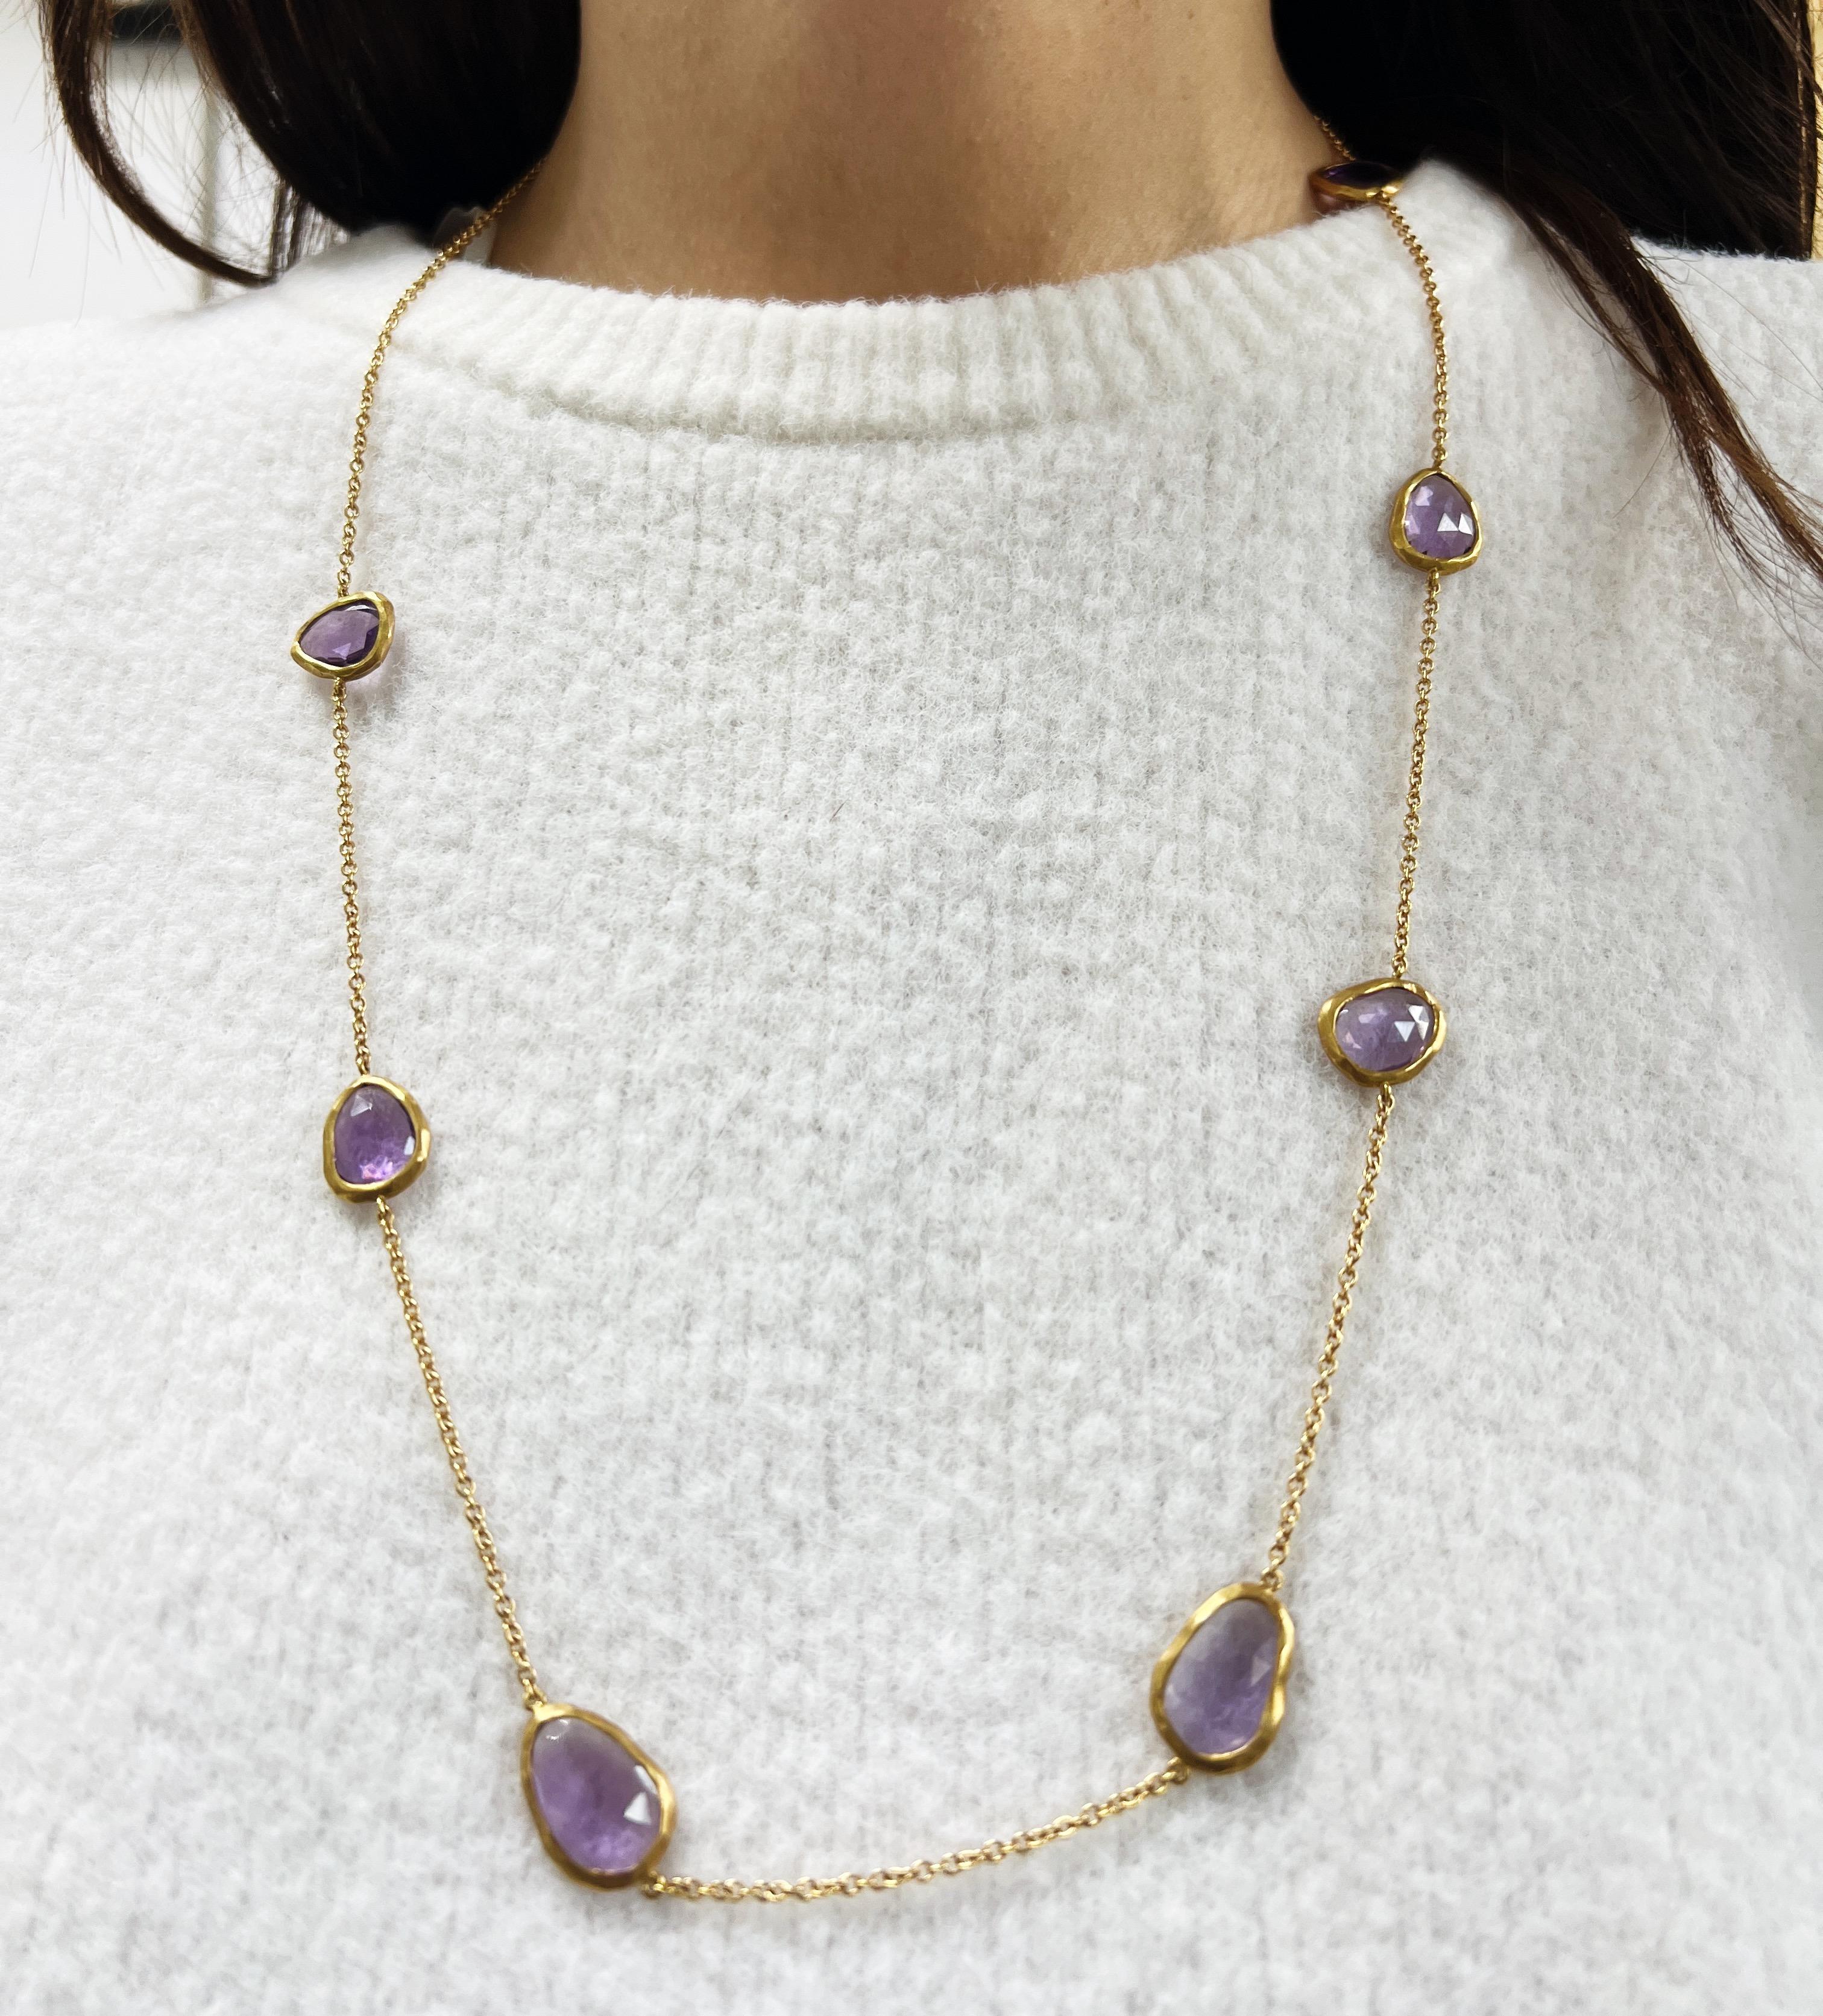 Modern 18kt Pink Gold Necklace chanel style chain with Amethyst gems